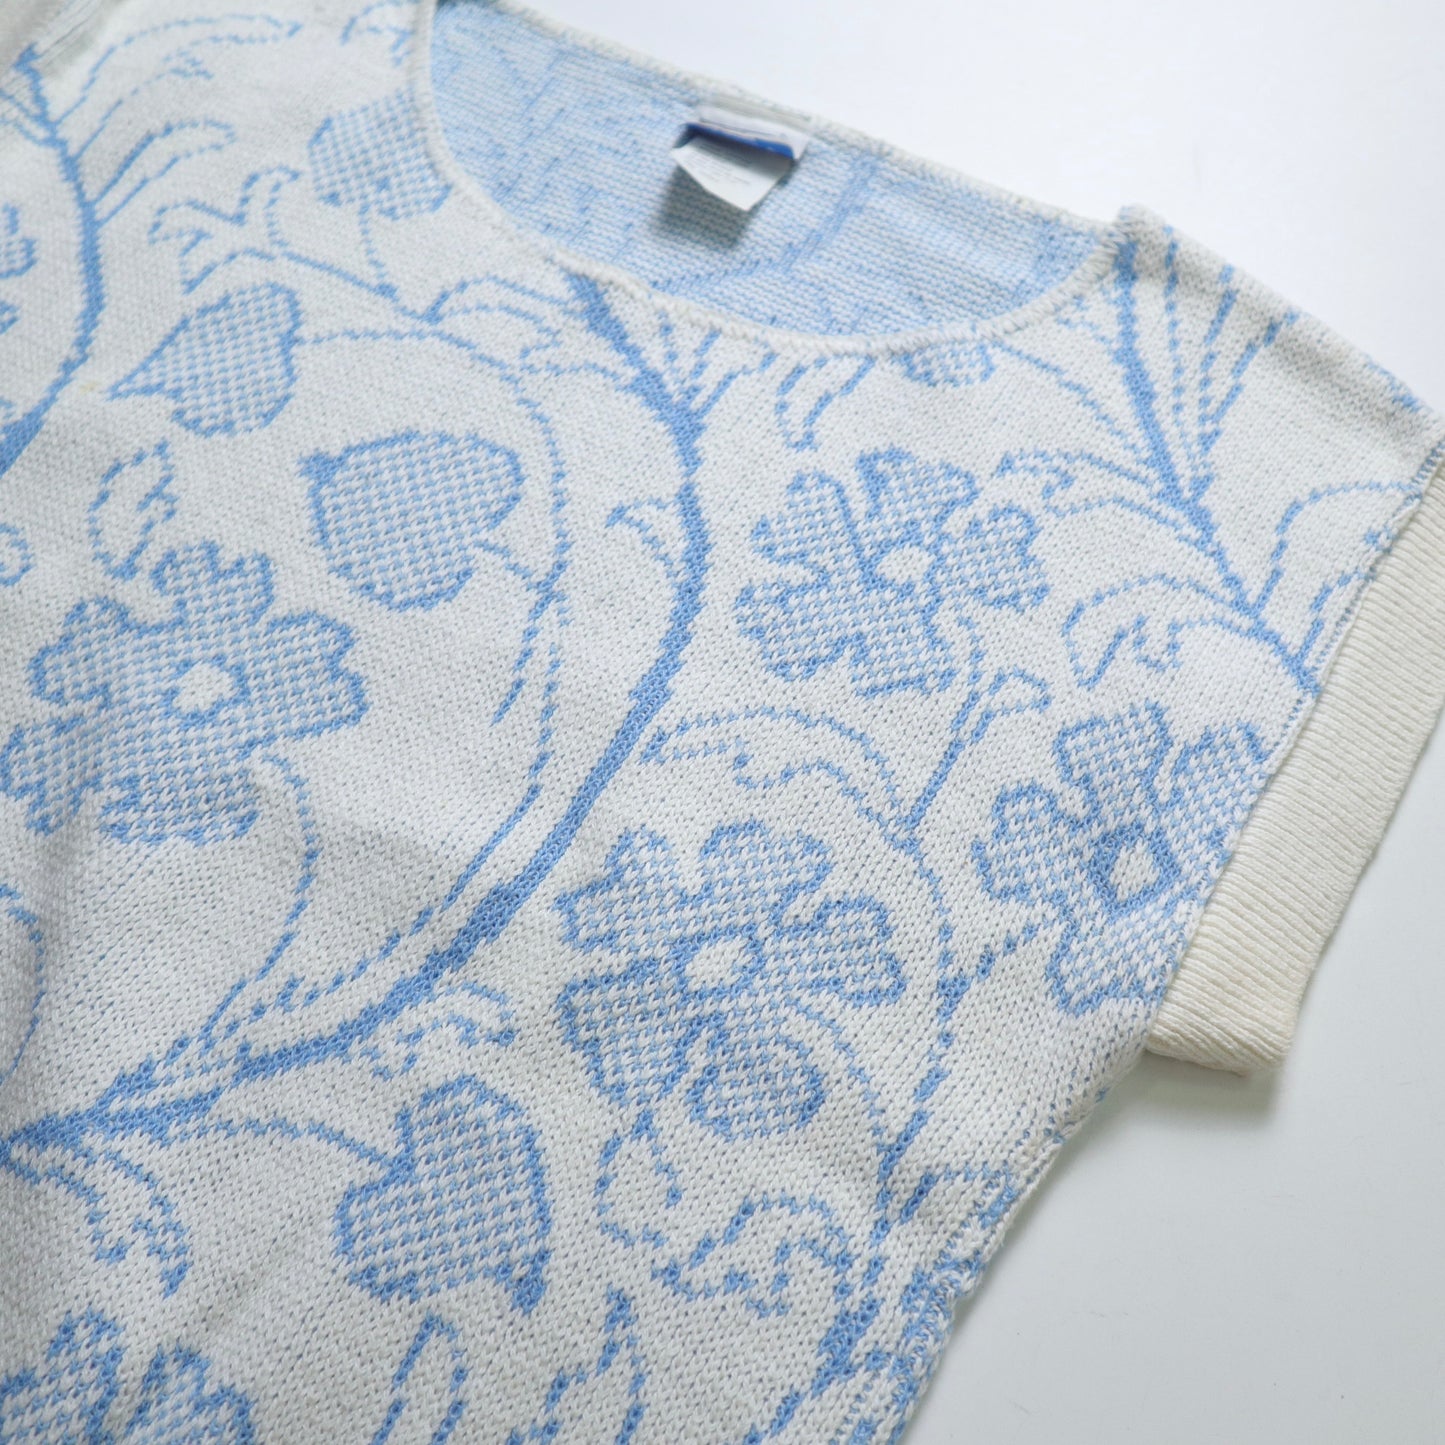 80s American-made white and aqua blue printed knitted top